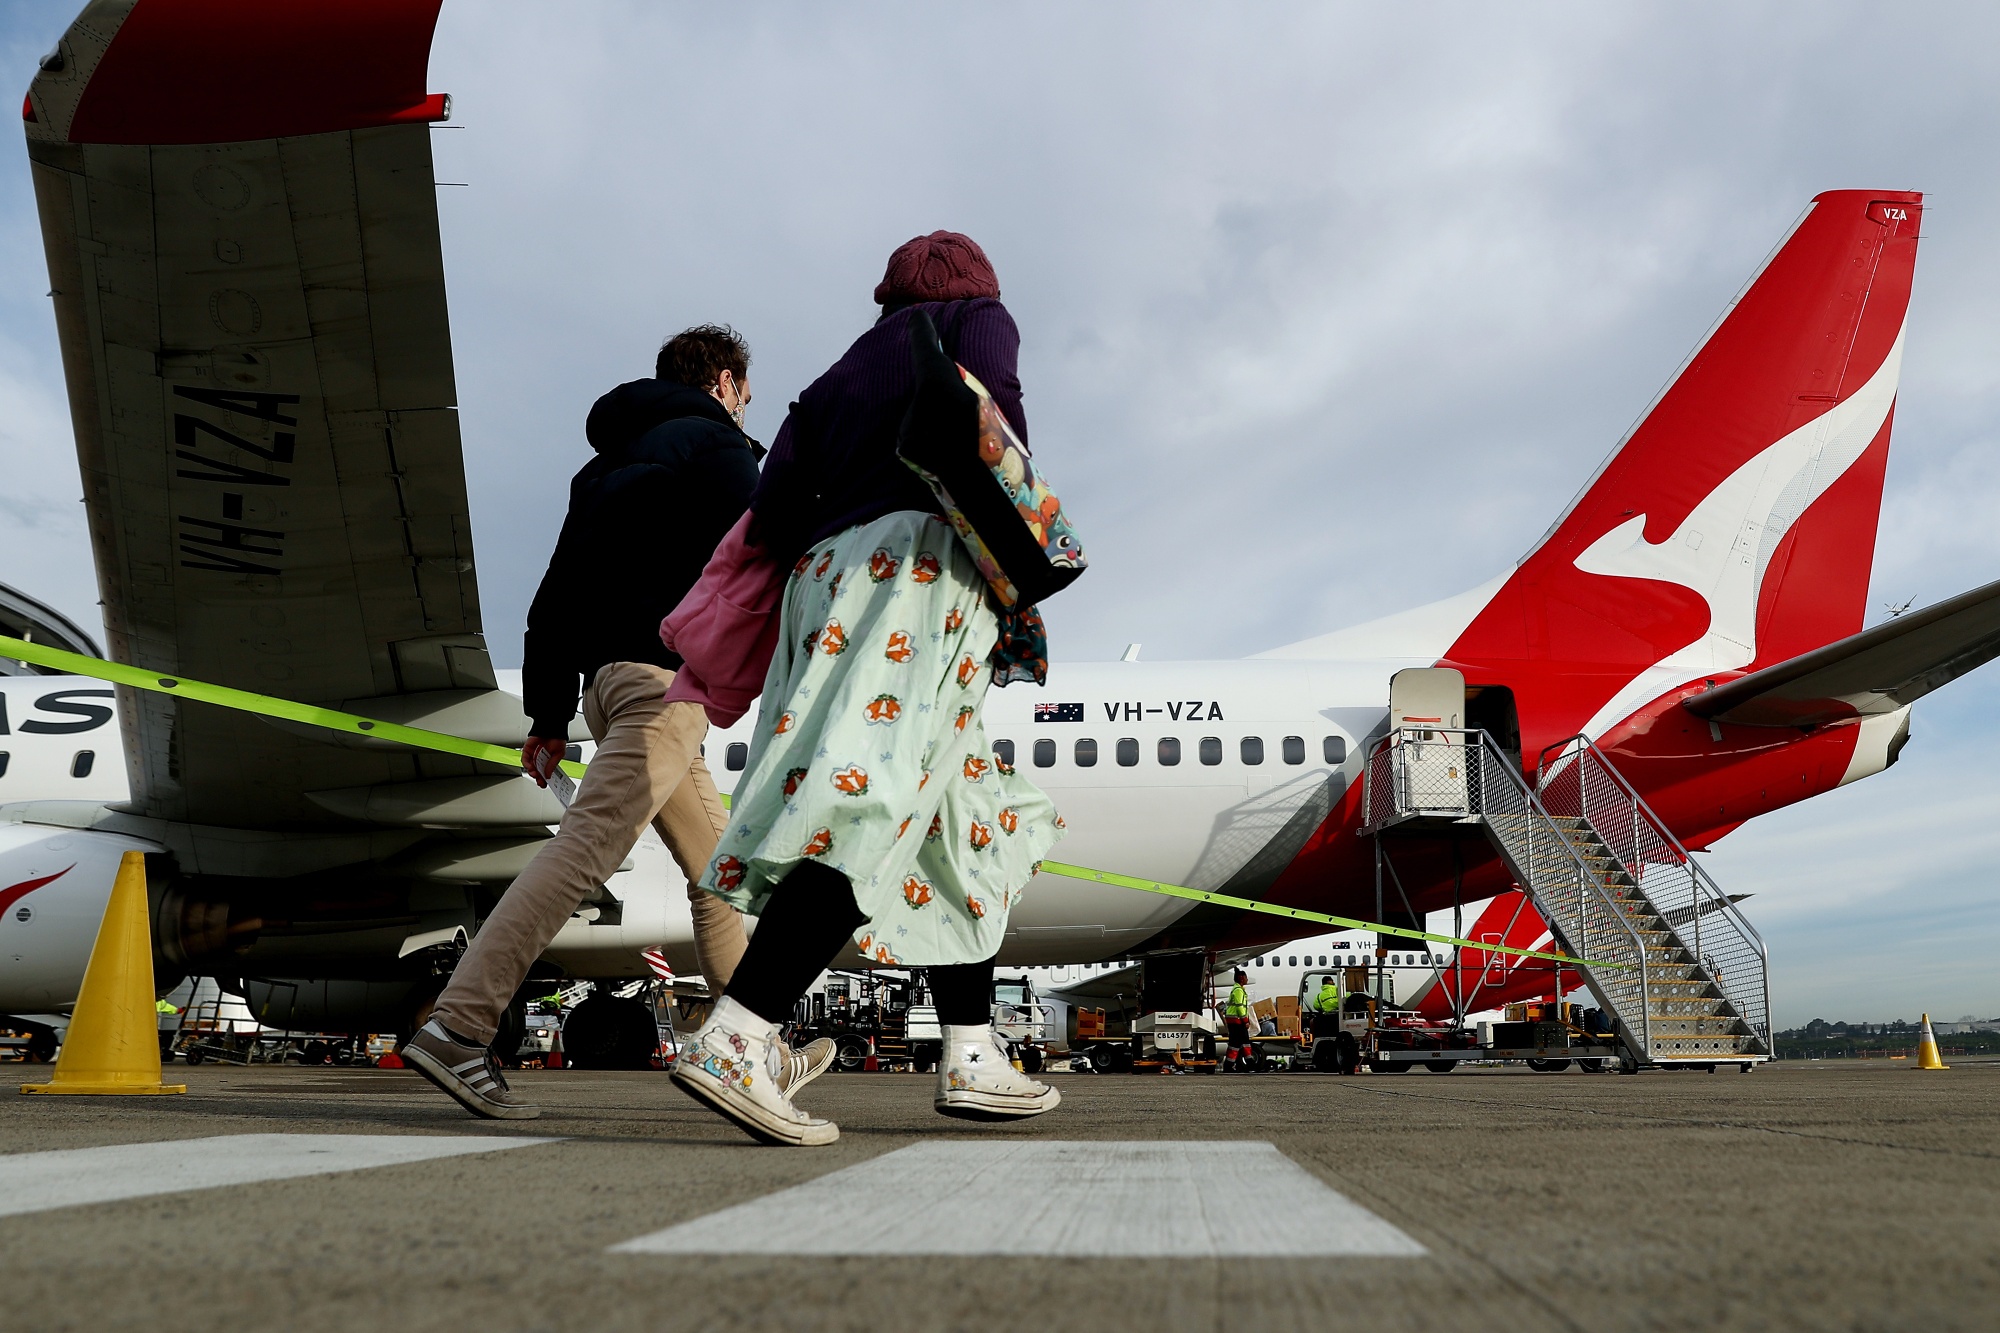 Qantas (QAN) to Hire 8,500 Workers Over Decade to Reverse Covid Cuts -  Bloomberg